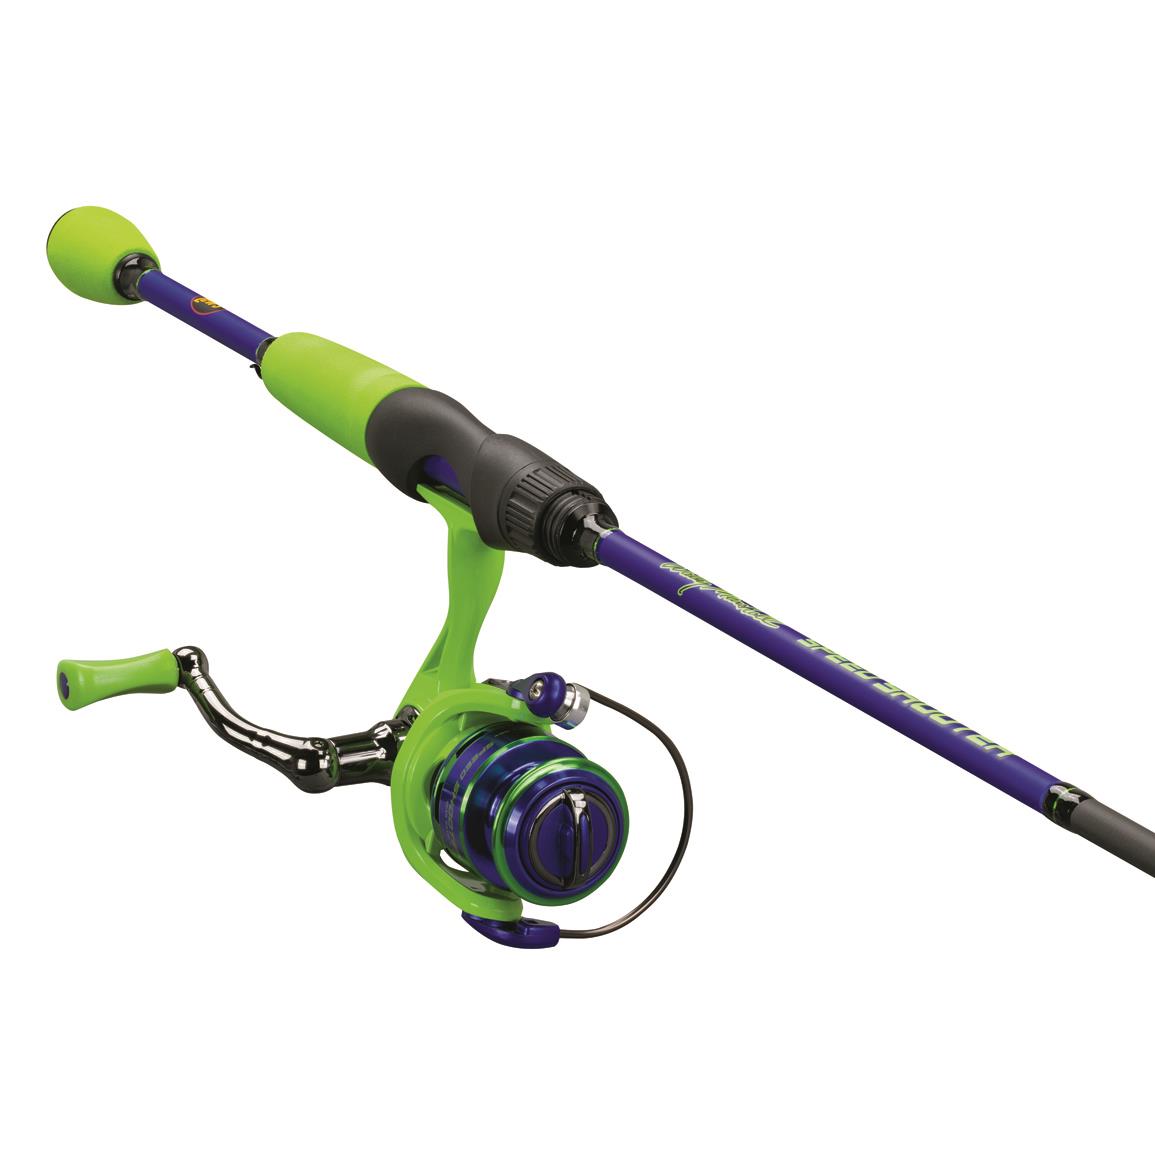 Spinning Fishing Rod ZEBCO Crappie 5'Ultra Light 2-6lb And Reel Total Tackle